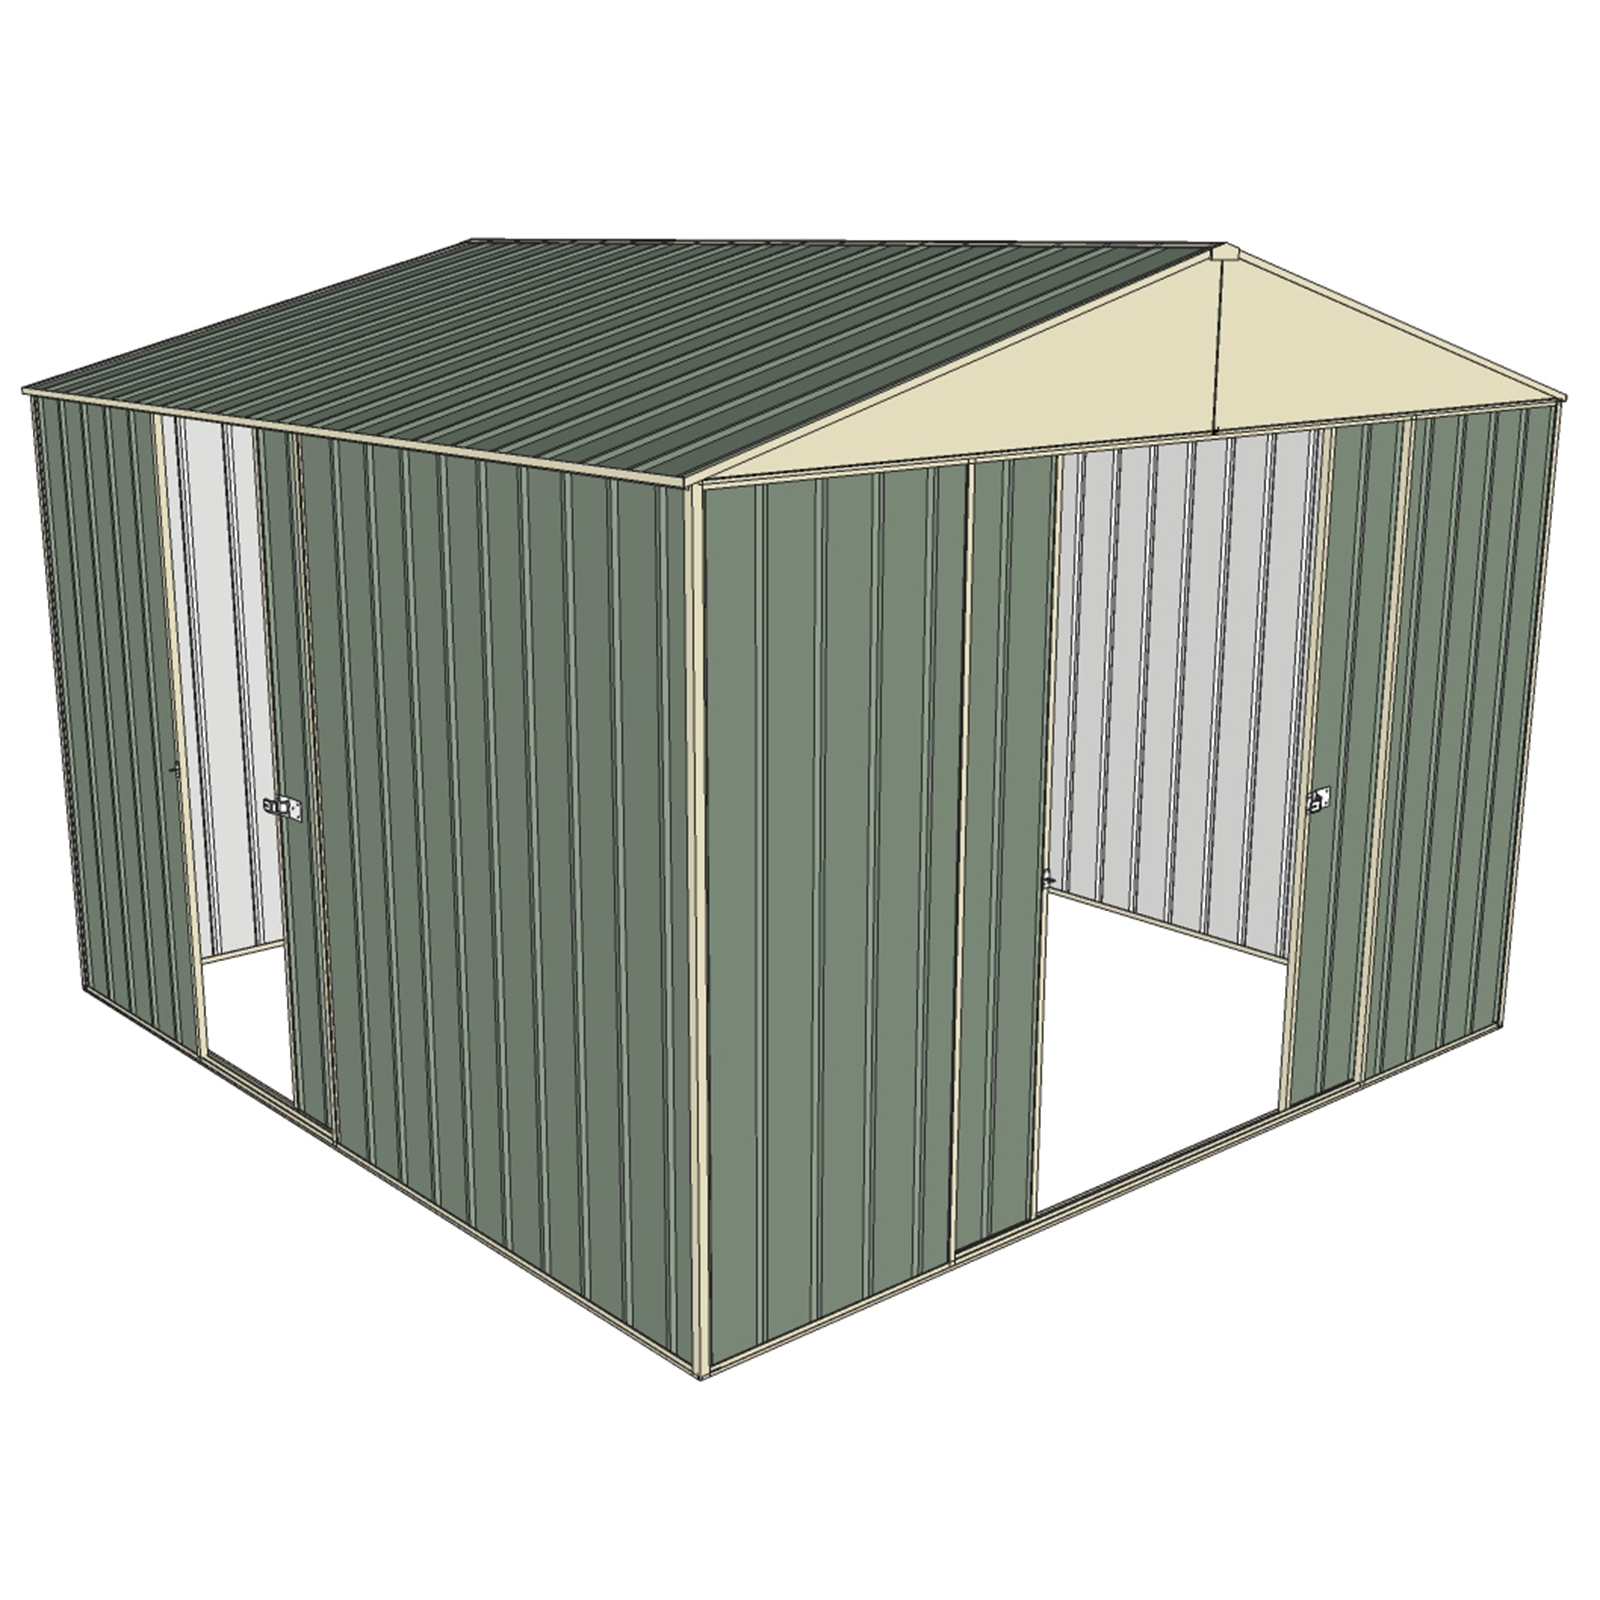 Build-a-Shed 3.0 x 3.0m Green Triple Sliding Door Shed